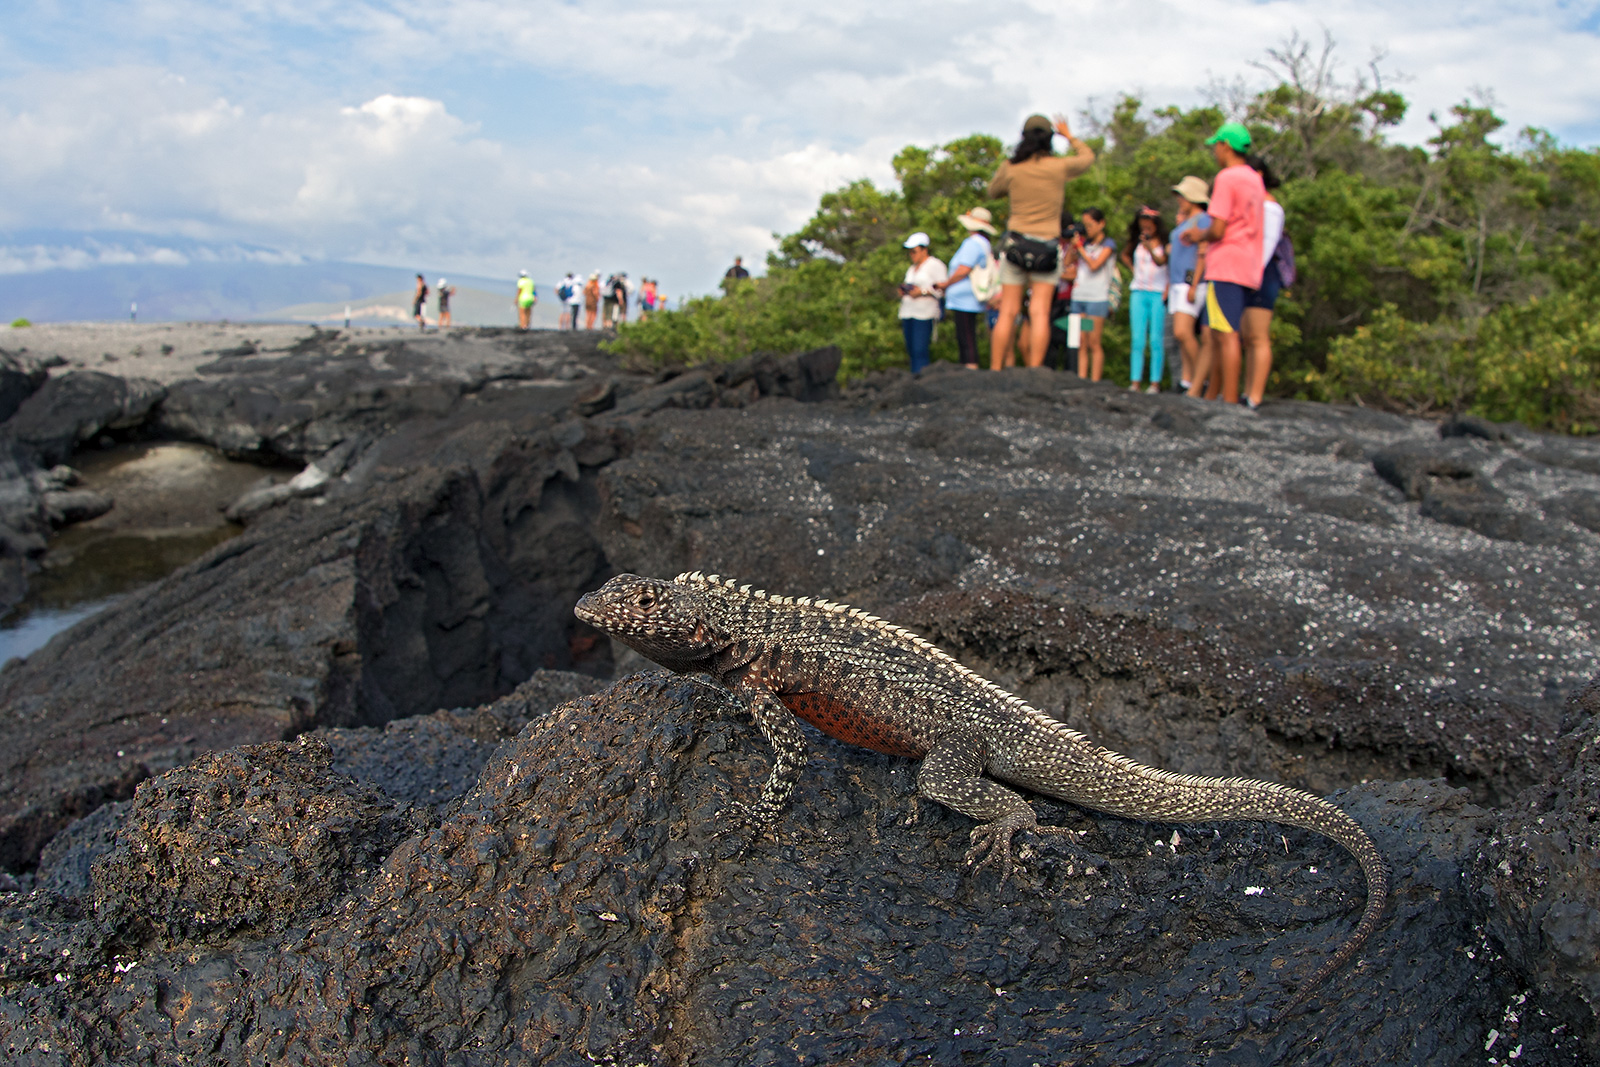 Lava lizard with a group of tourists in the background